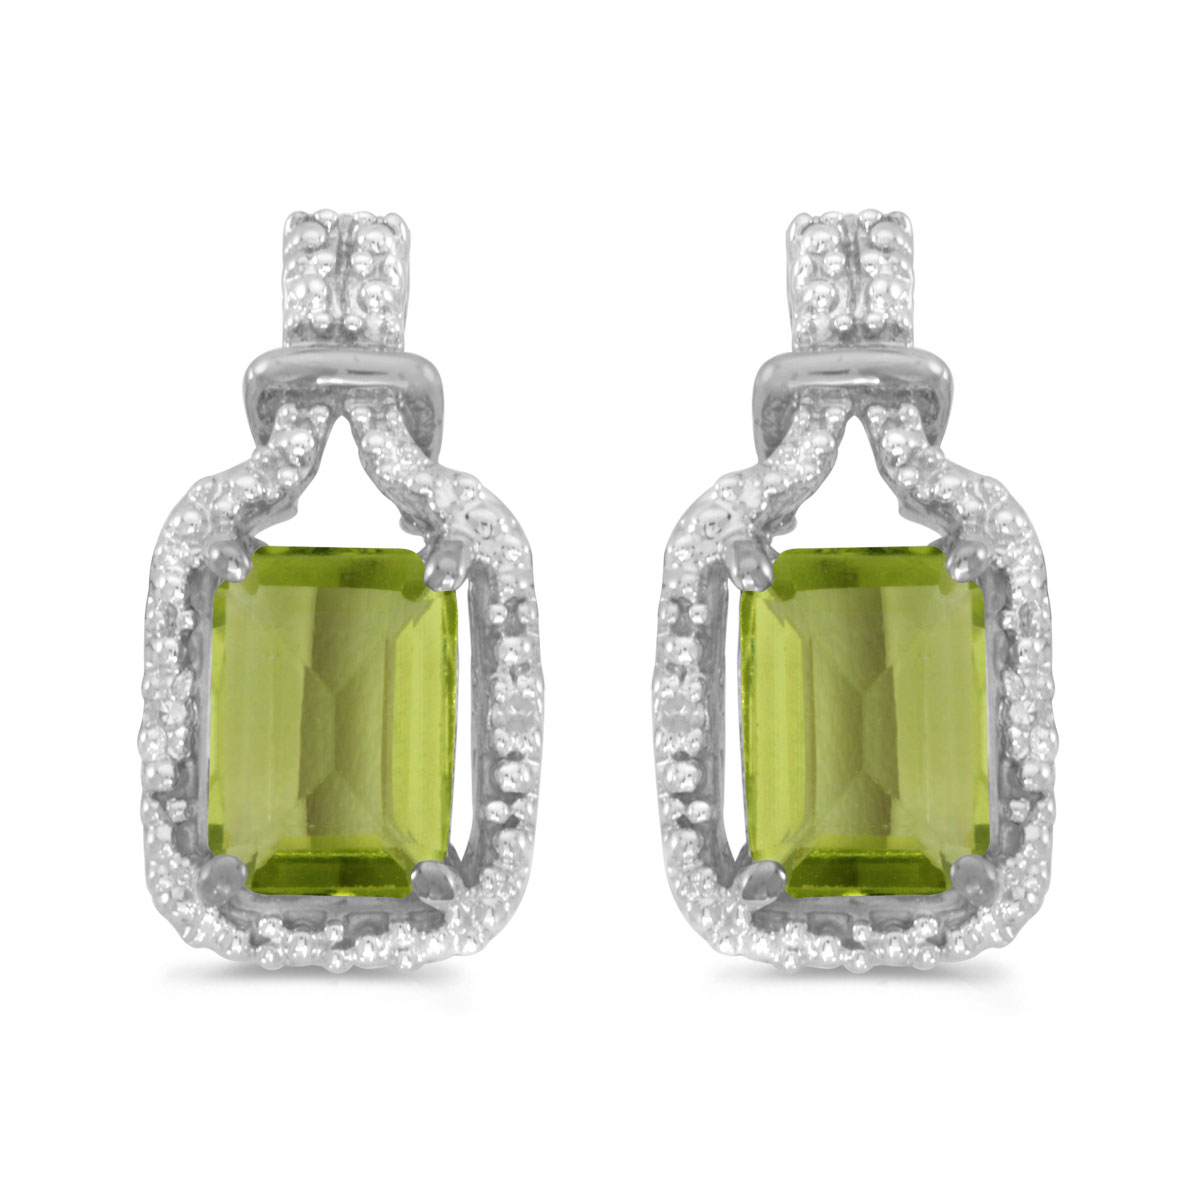 JCX2045: These 14k white gold emerald-cut peridot and diamond earrings feature 7x5 mm genuine natural peridots with a 1.66 ct total weight and sparkling diamond accents.